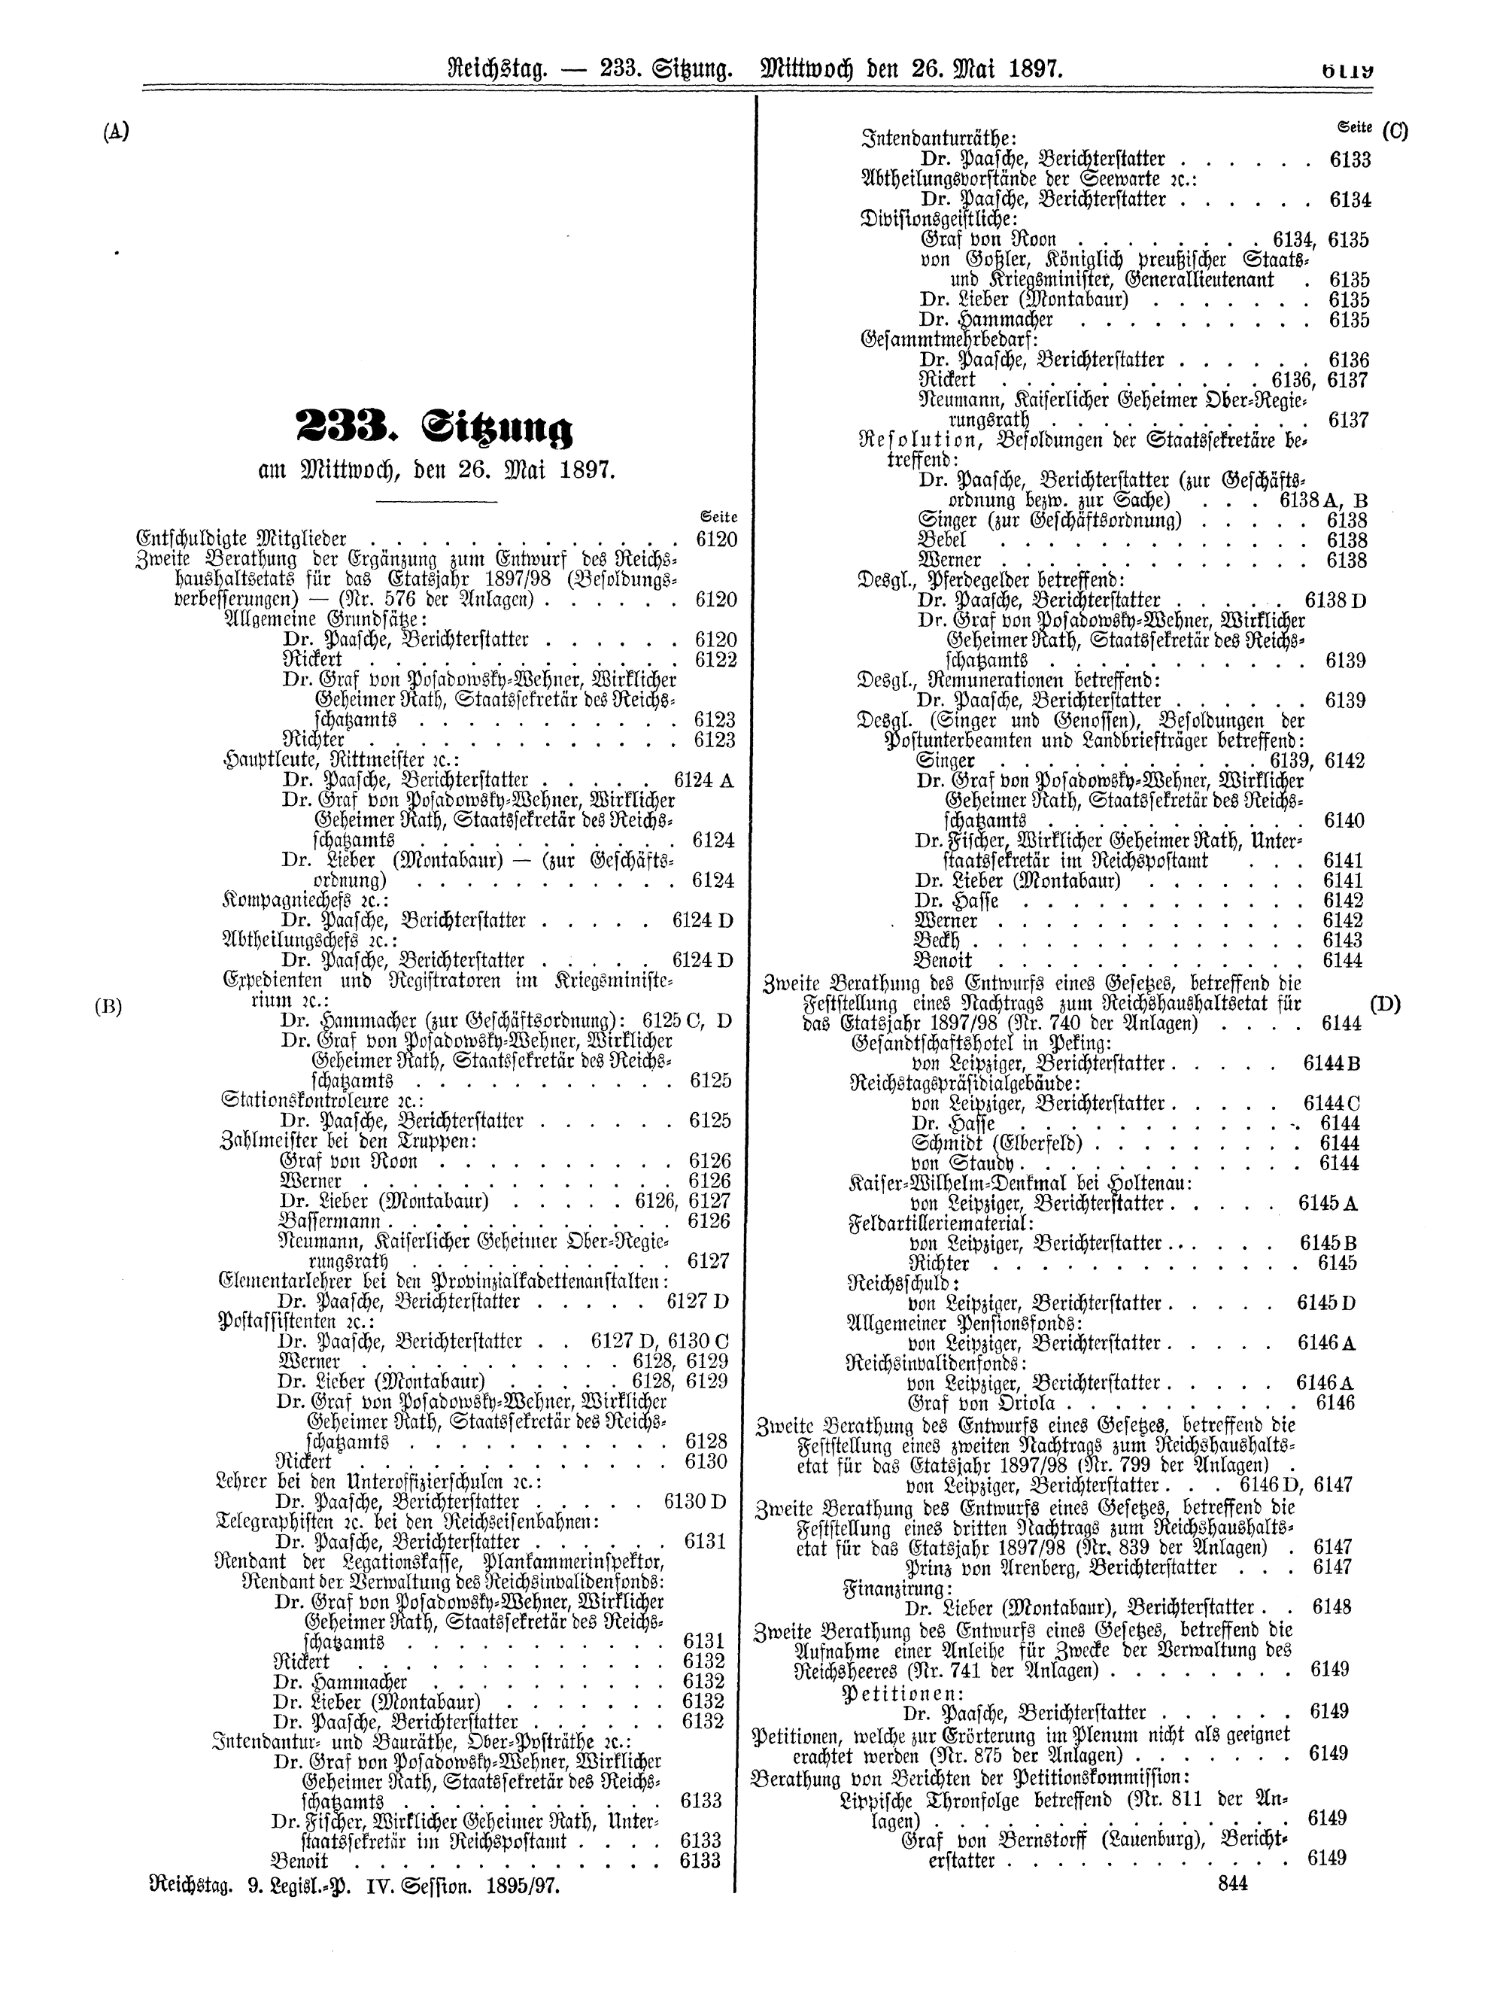 Scan of page 6119